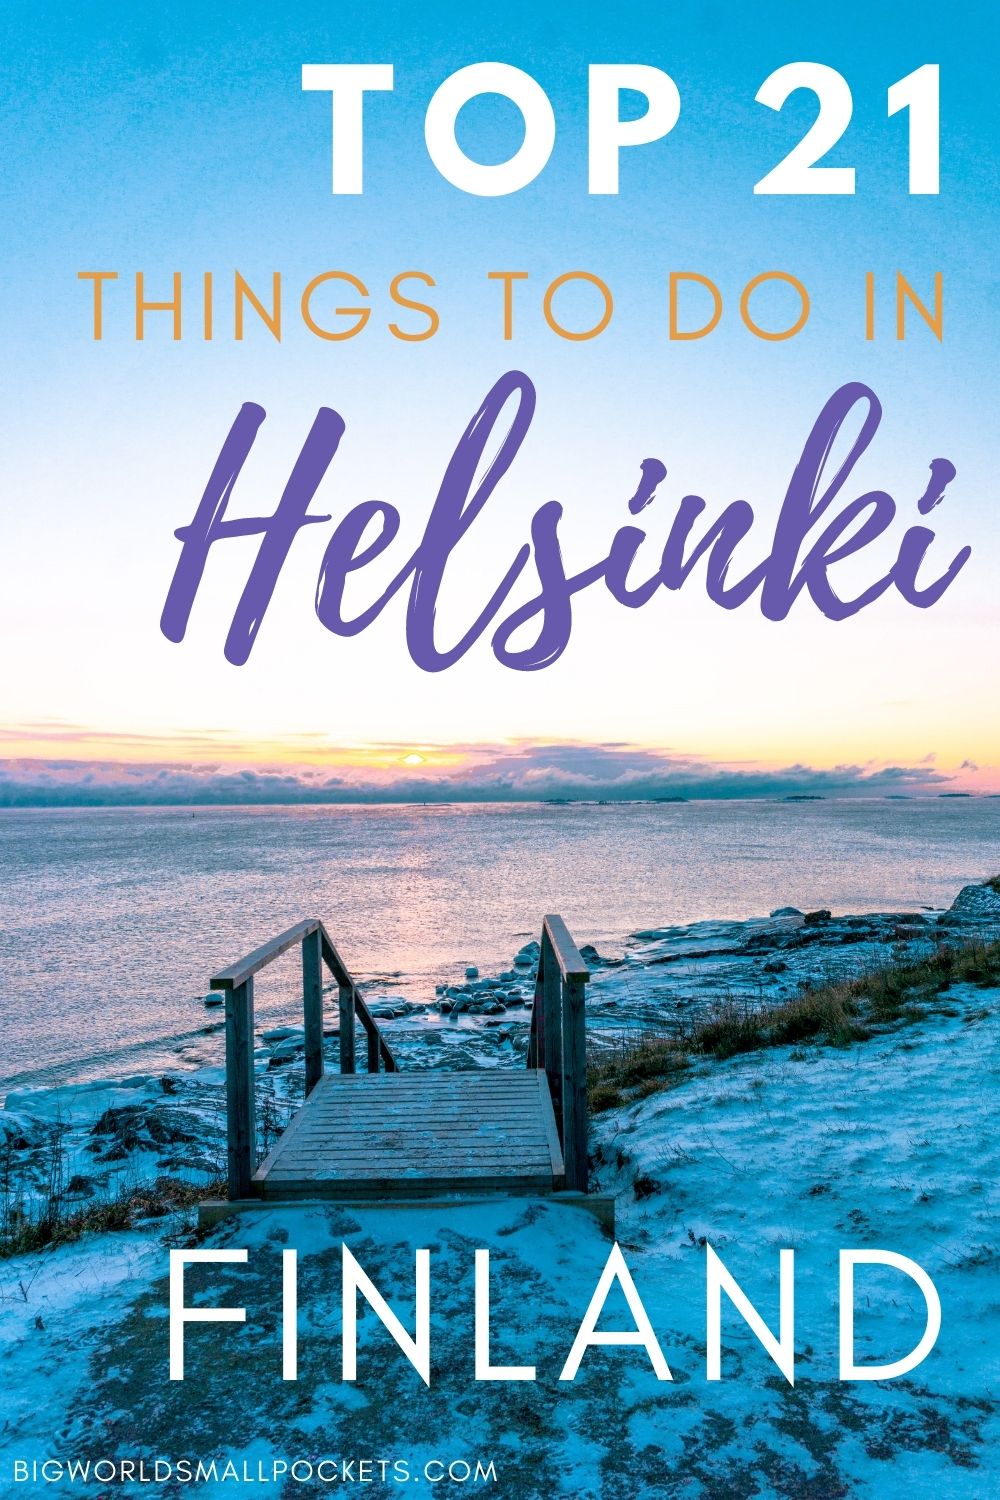 Top 21 Things to Do in Helsinki, Finland